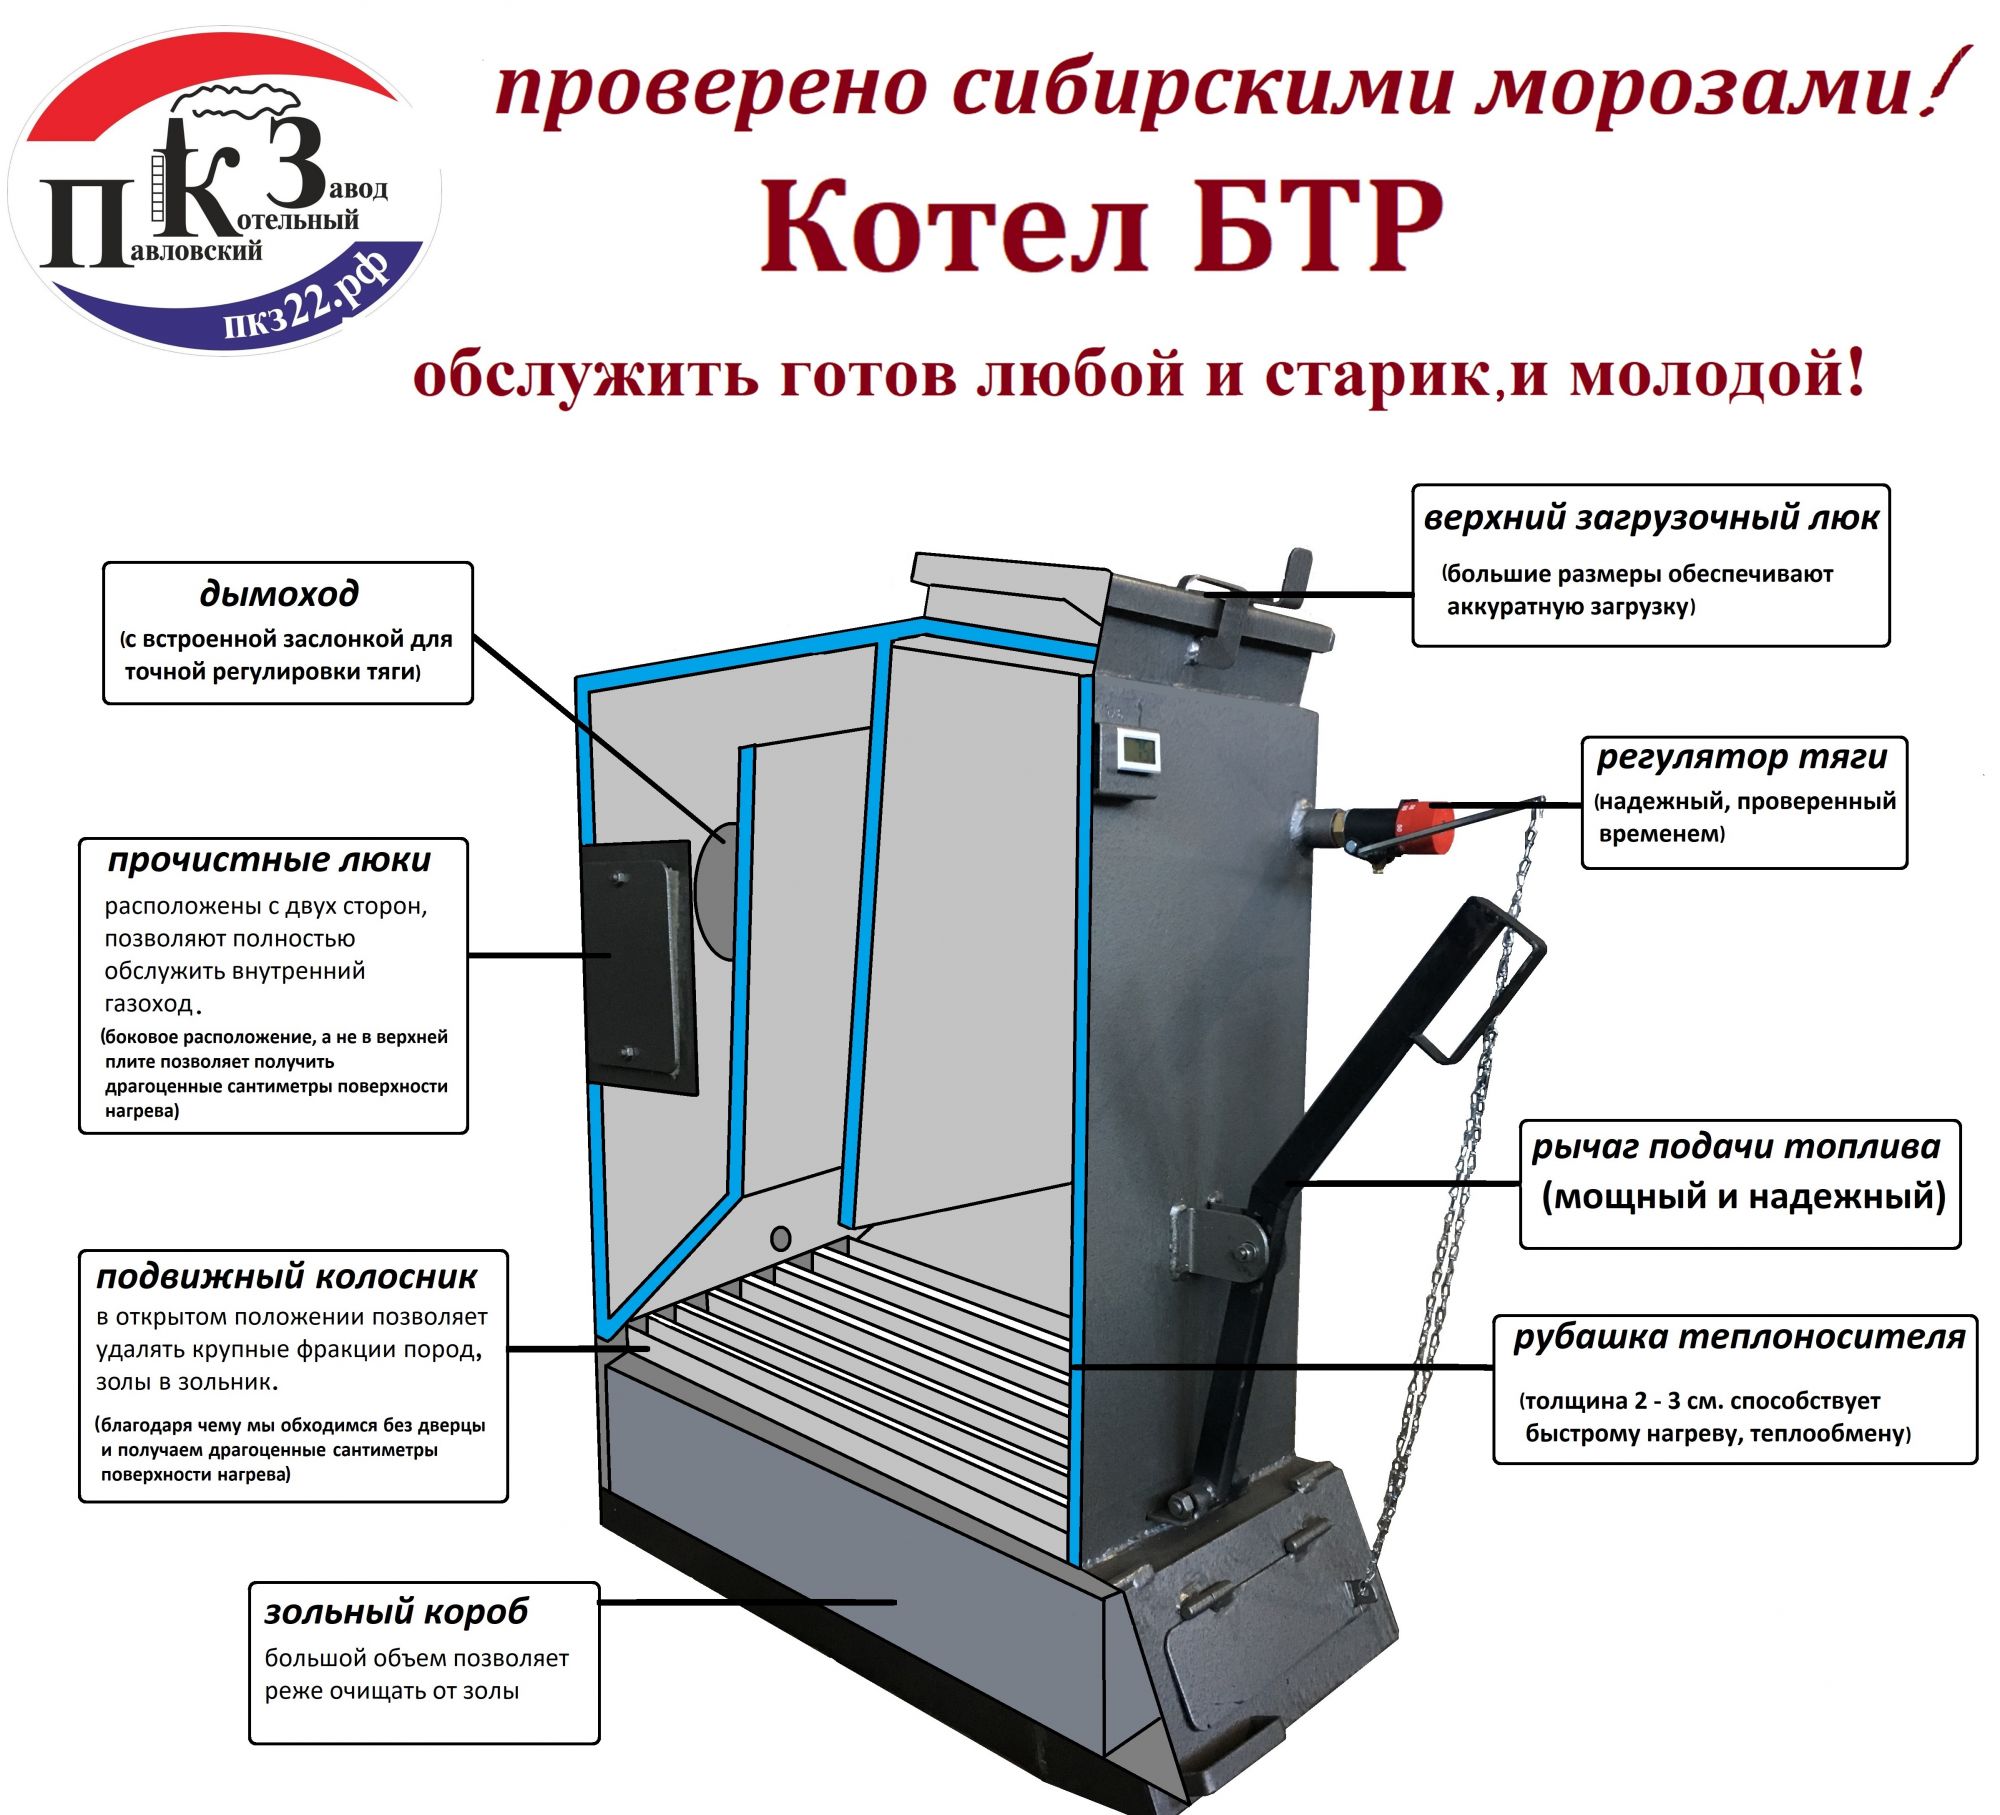 Boiler BTR - Utilizer (from 15 to 100 kW)